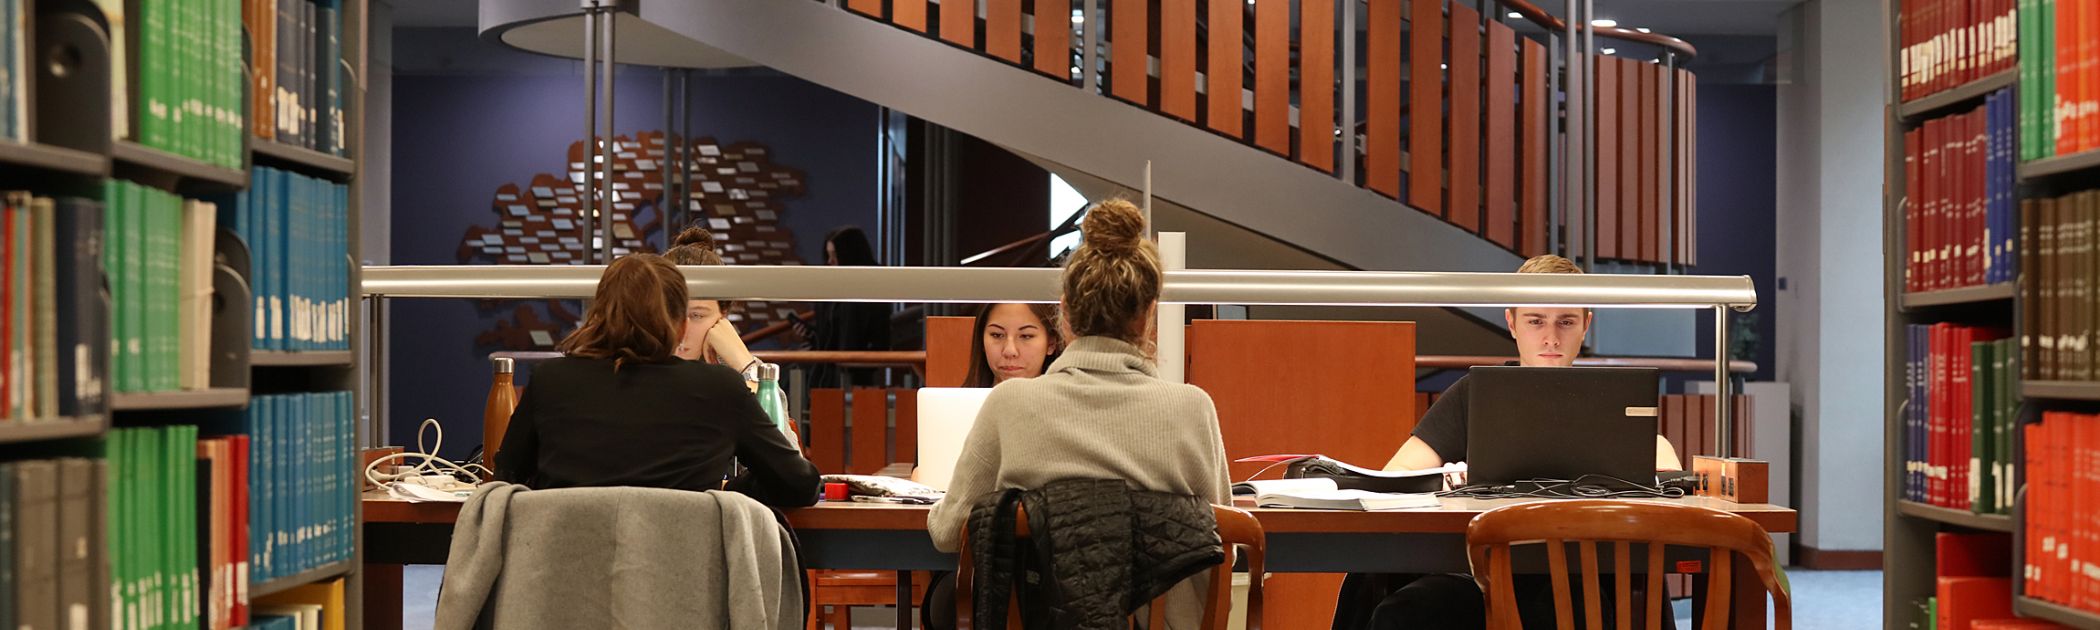 Students studying in Stauffer Library between the shelves of books 